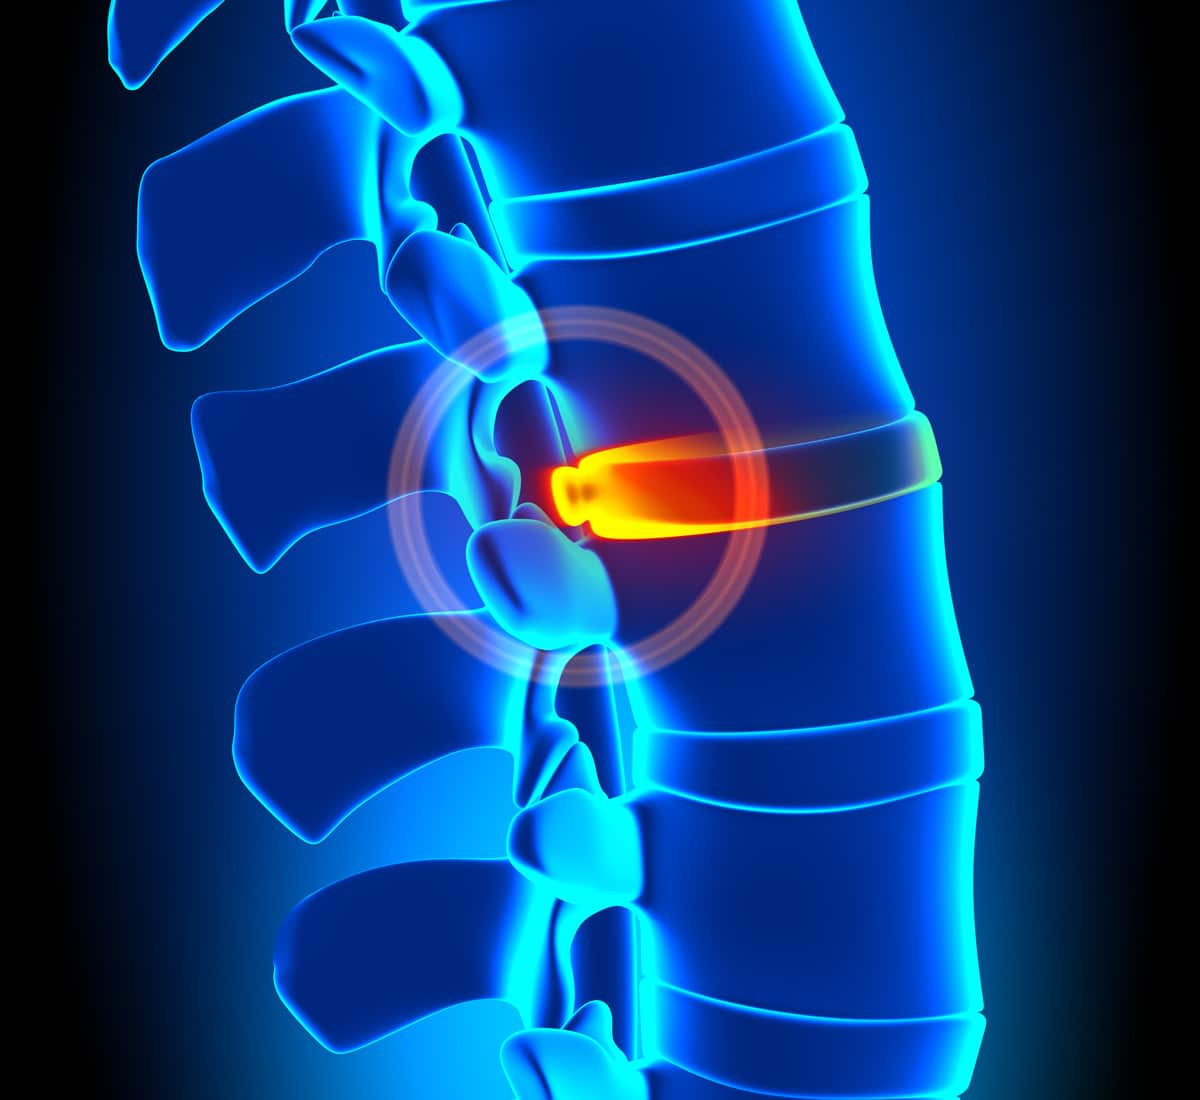 Key Differences Between a Herniated and Bulging Disc a sufferer in